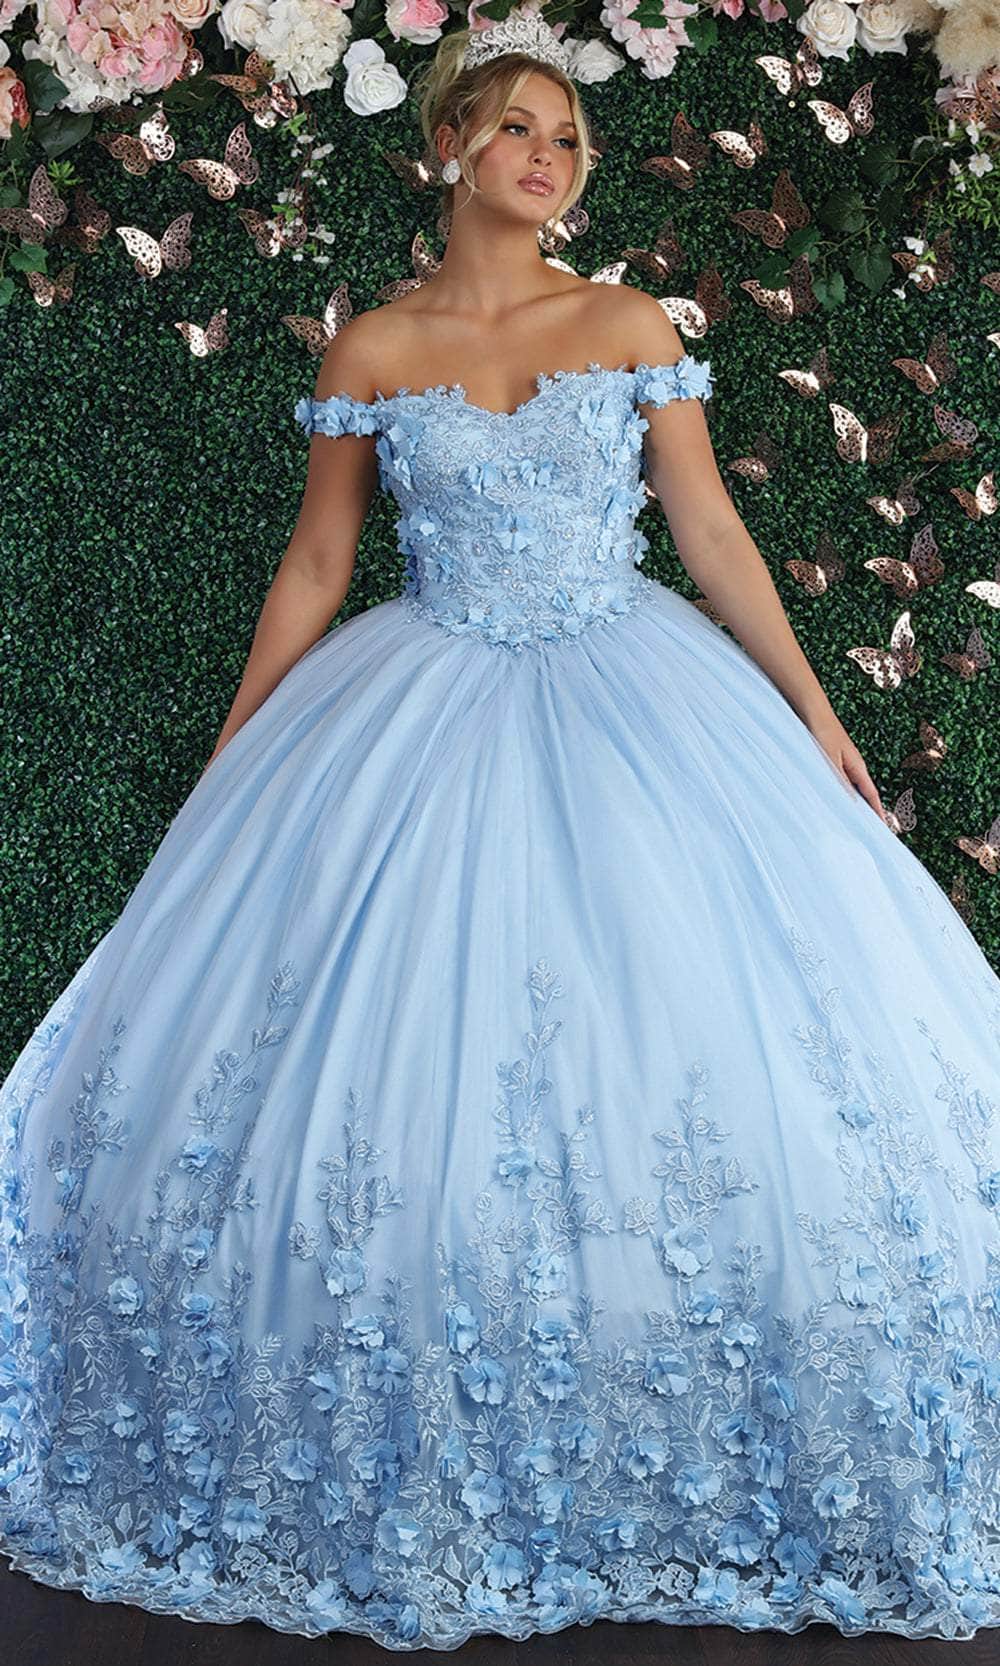 May Queen LK158 - 3D Florals Off Shoulder Ball gown Special Occasion Dress 4 / Babyblue